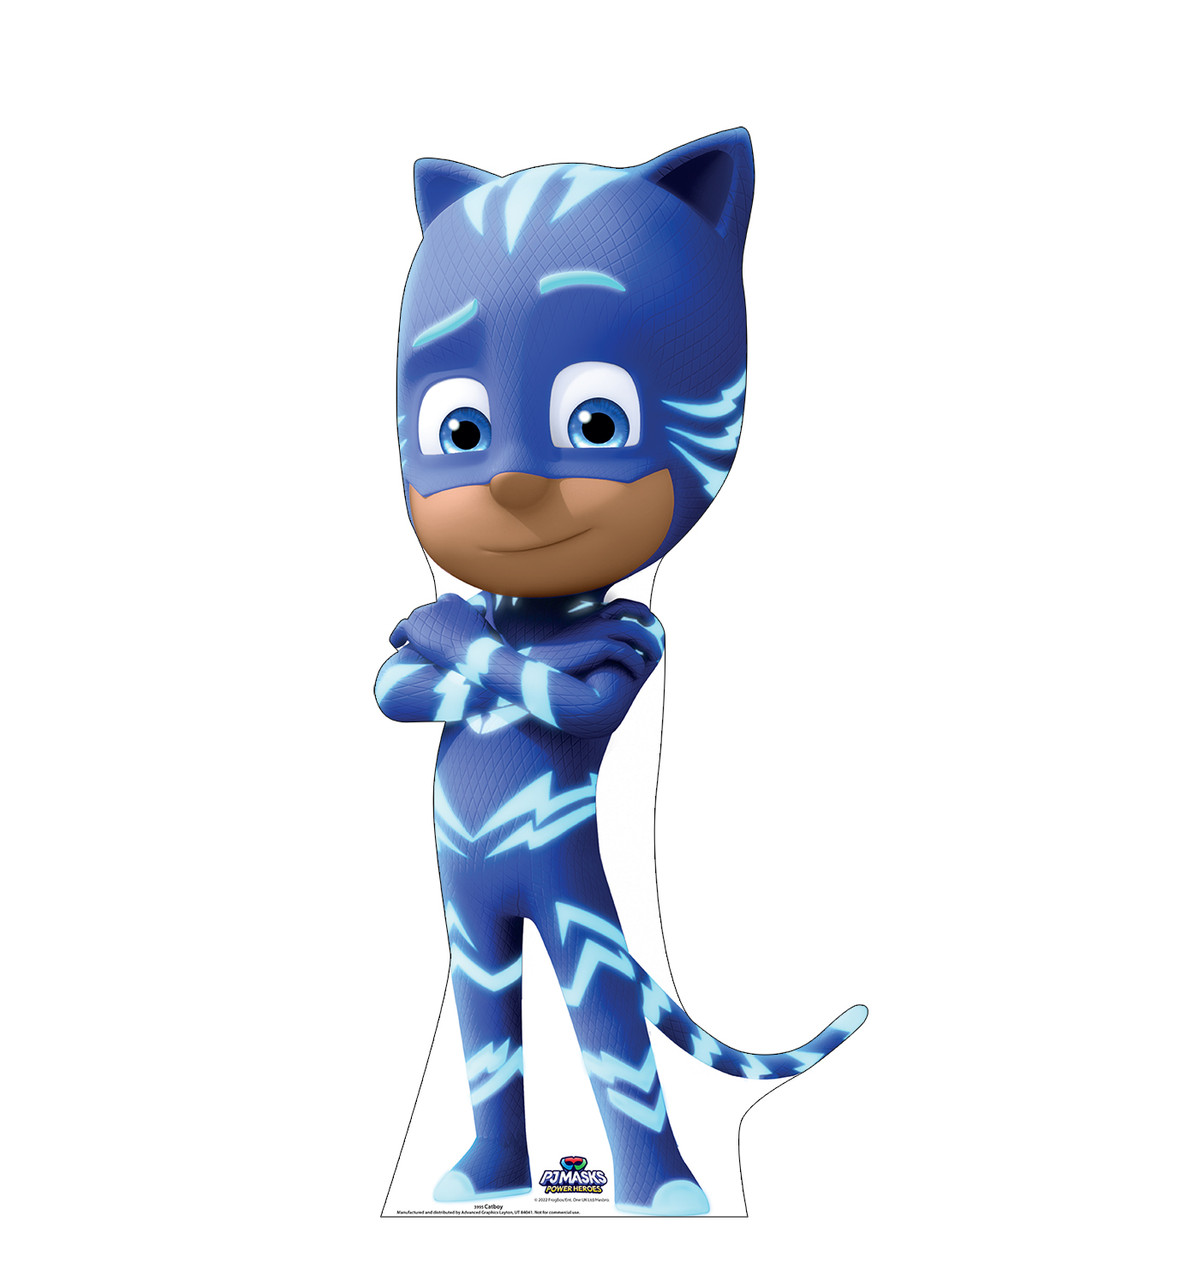 Life-size cardboard standee of Catboy from PJ Masks Power Heroess.